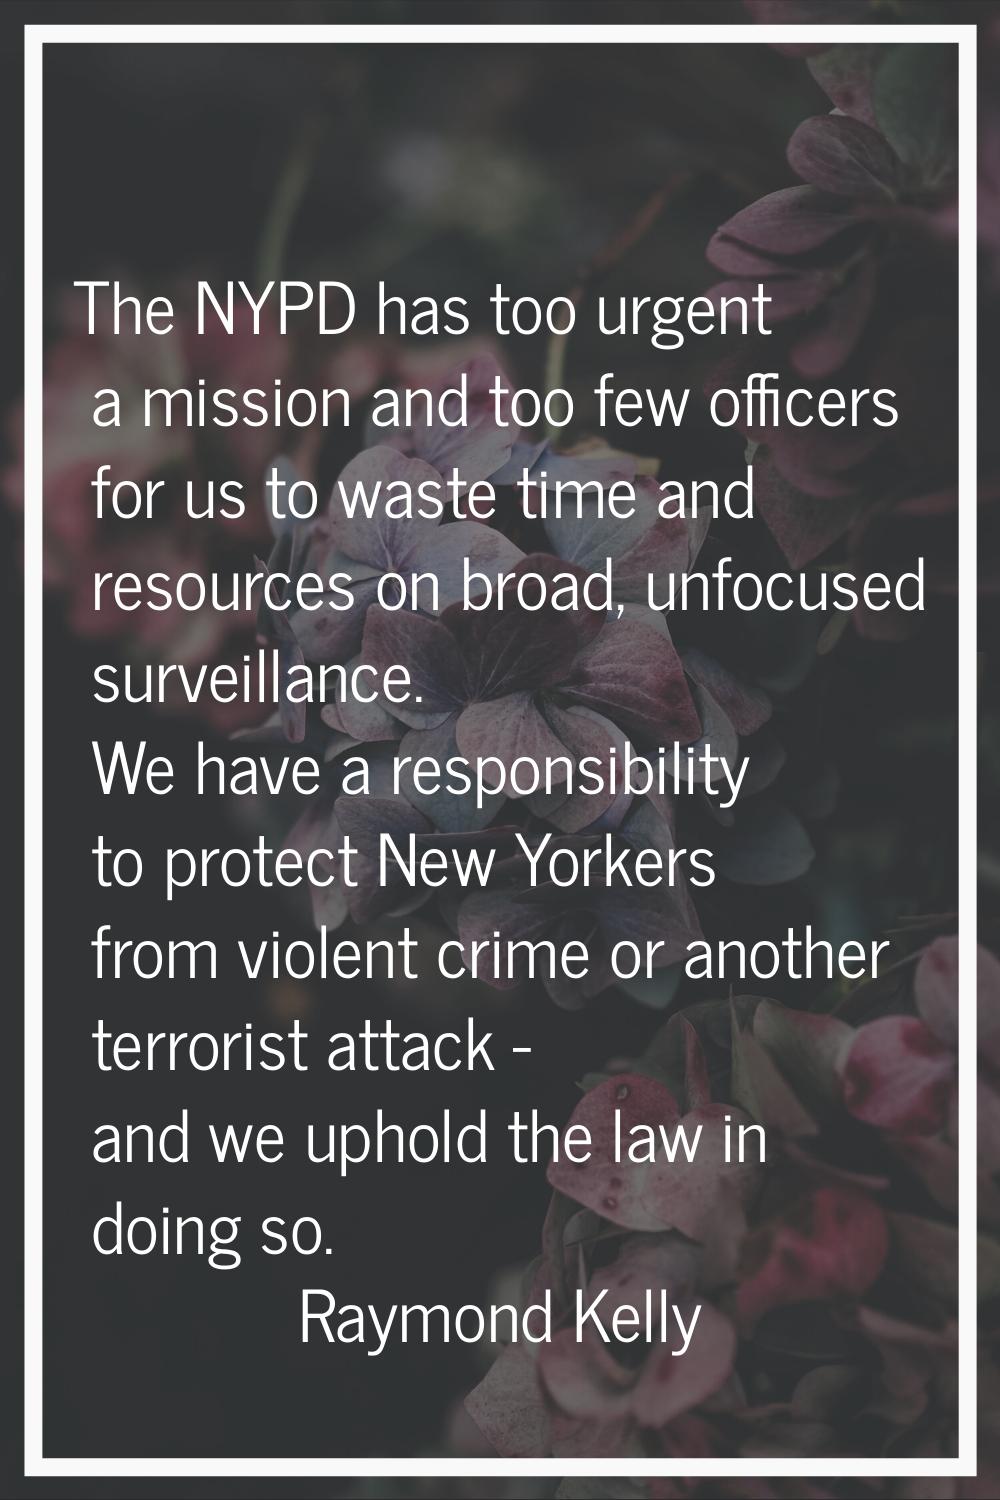 The NYPD has too urgent a mission and too few officers for us to waste time and resources on broad,